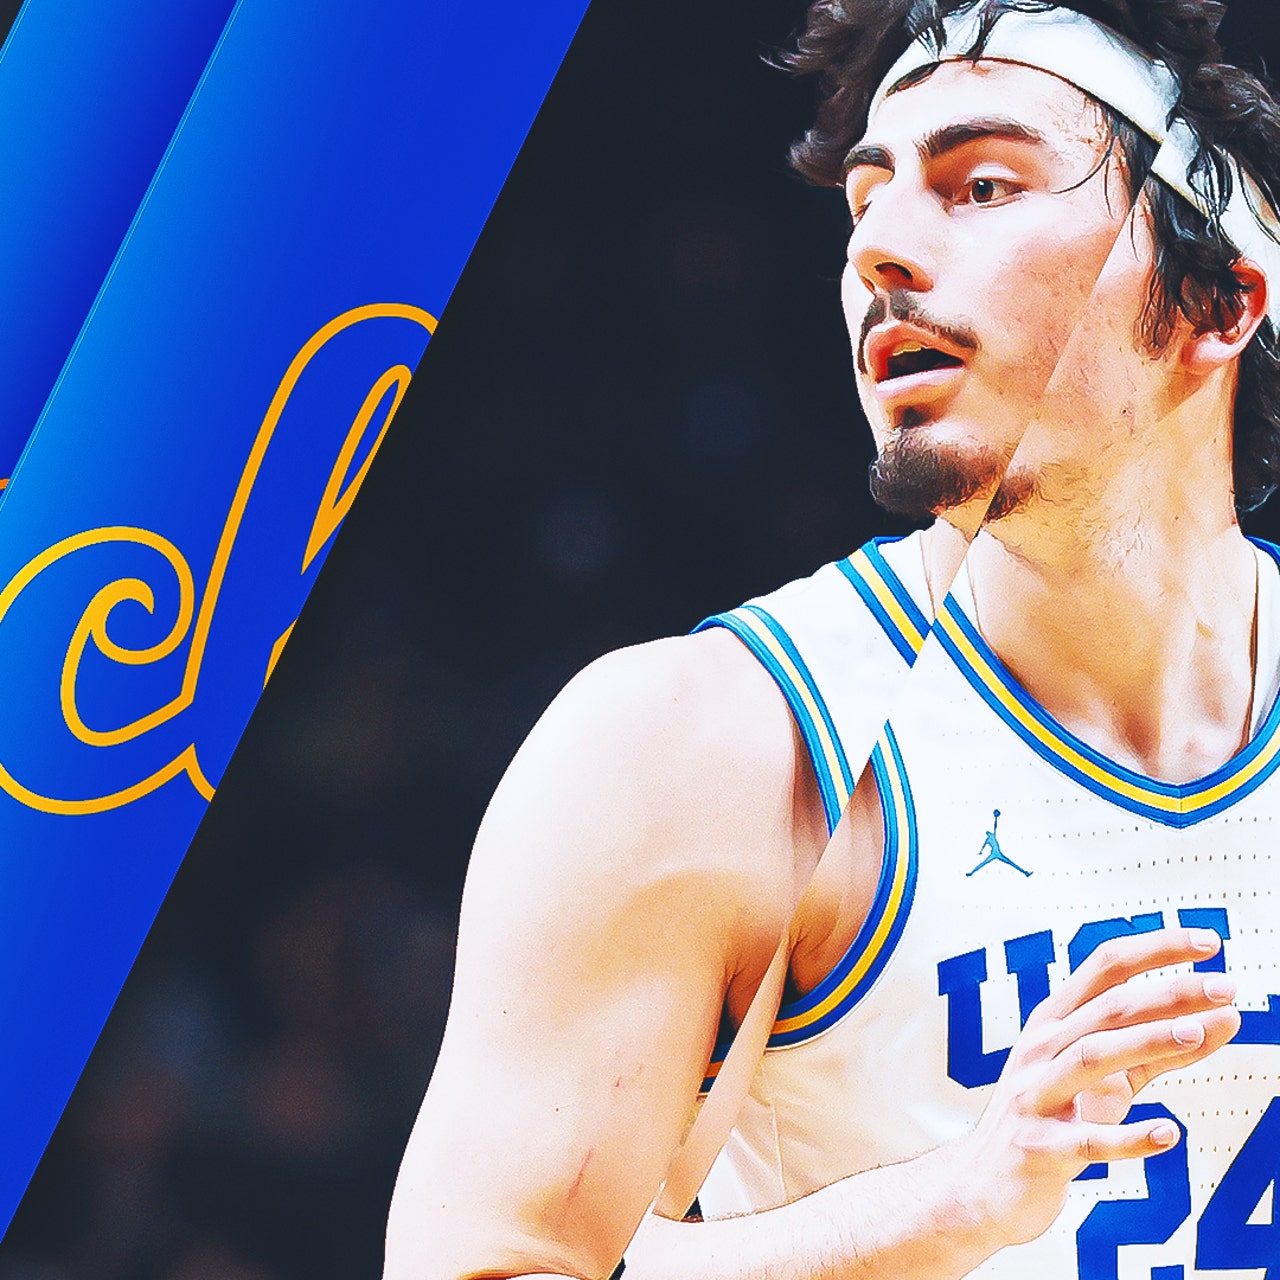 He's always had a different brain': Inside Johnny Juzang's vision quest for  UCLA - The Athletic